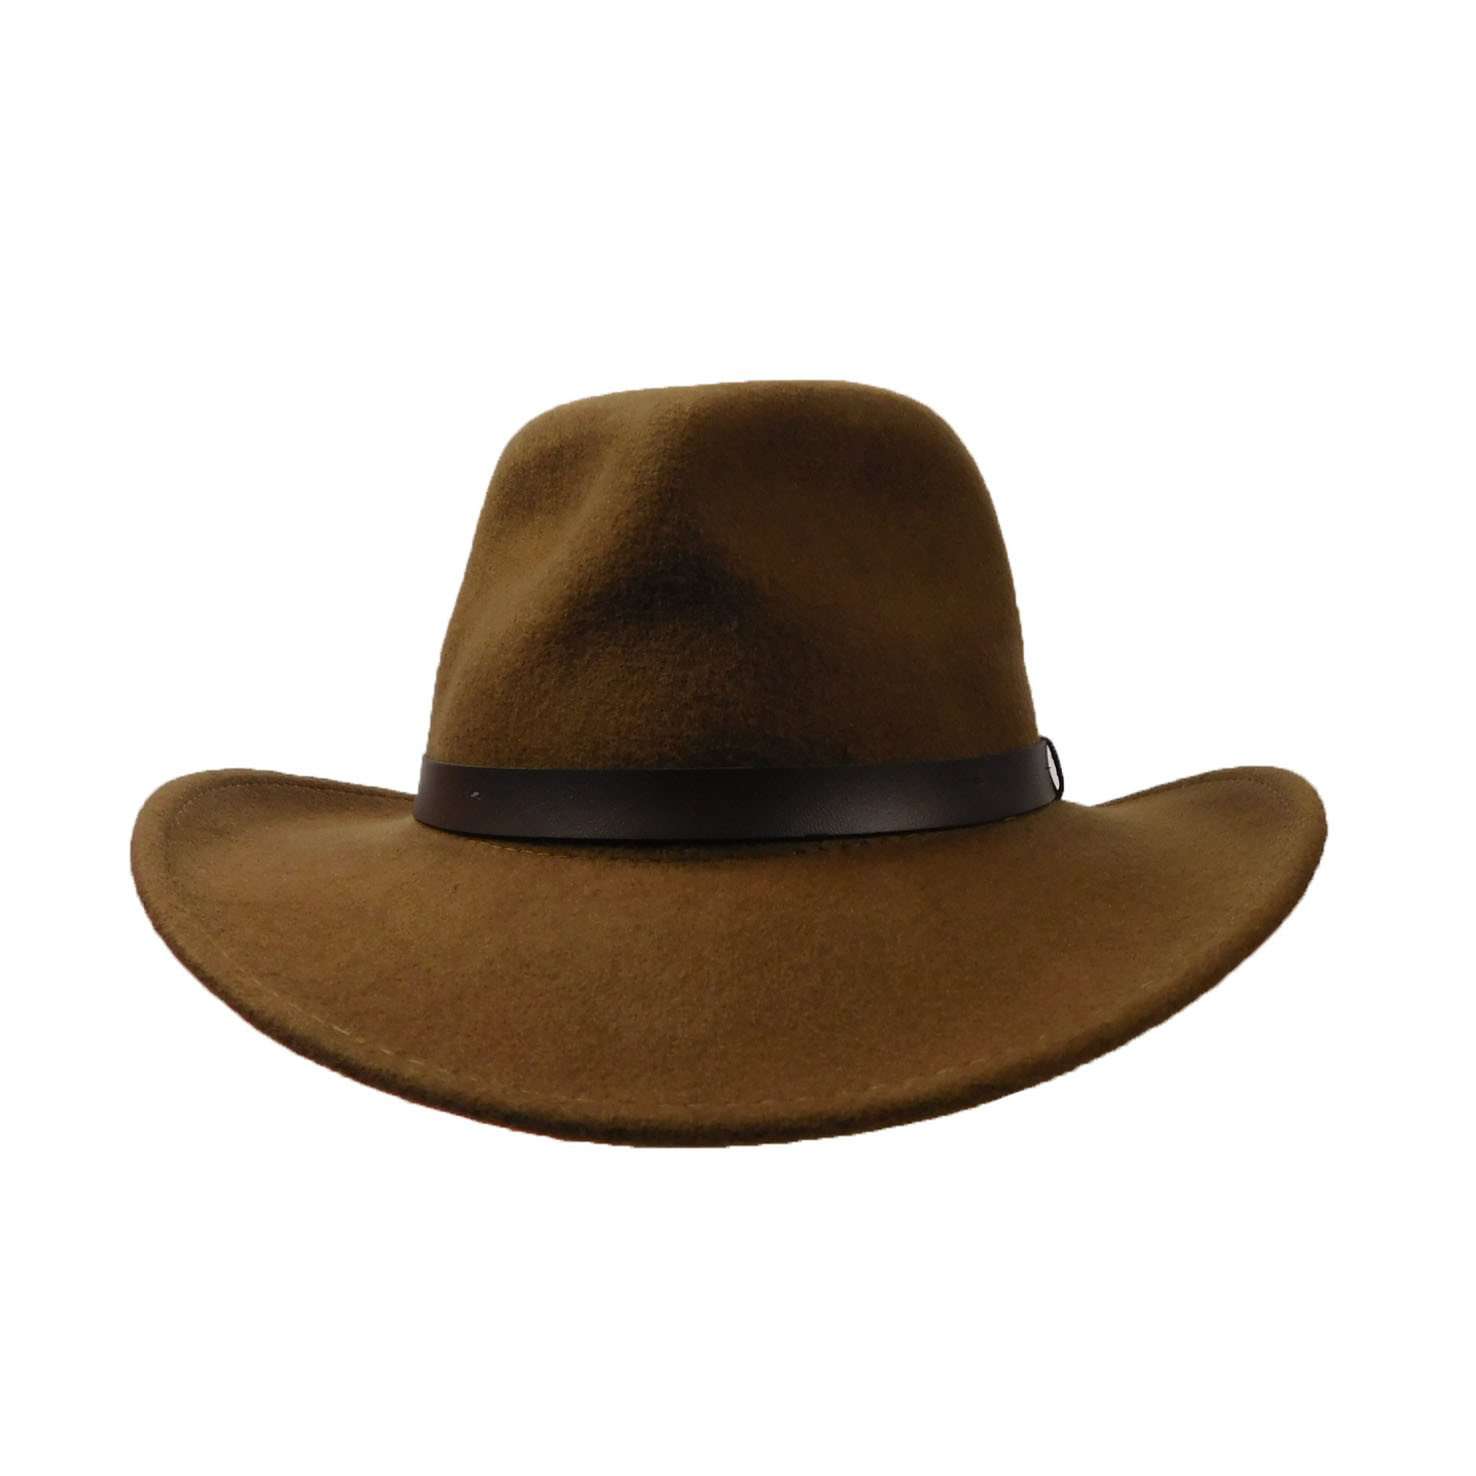 Wool Felt Outback with Leather Band Safari Hat Dorfman Hat Co. MWWF966BNS Brown S 